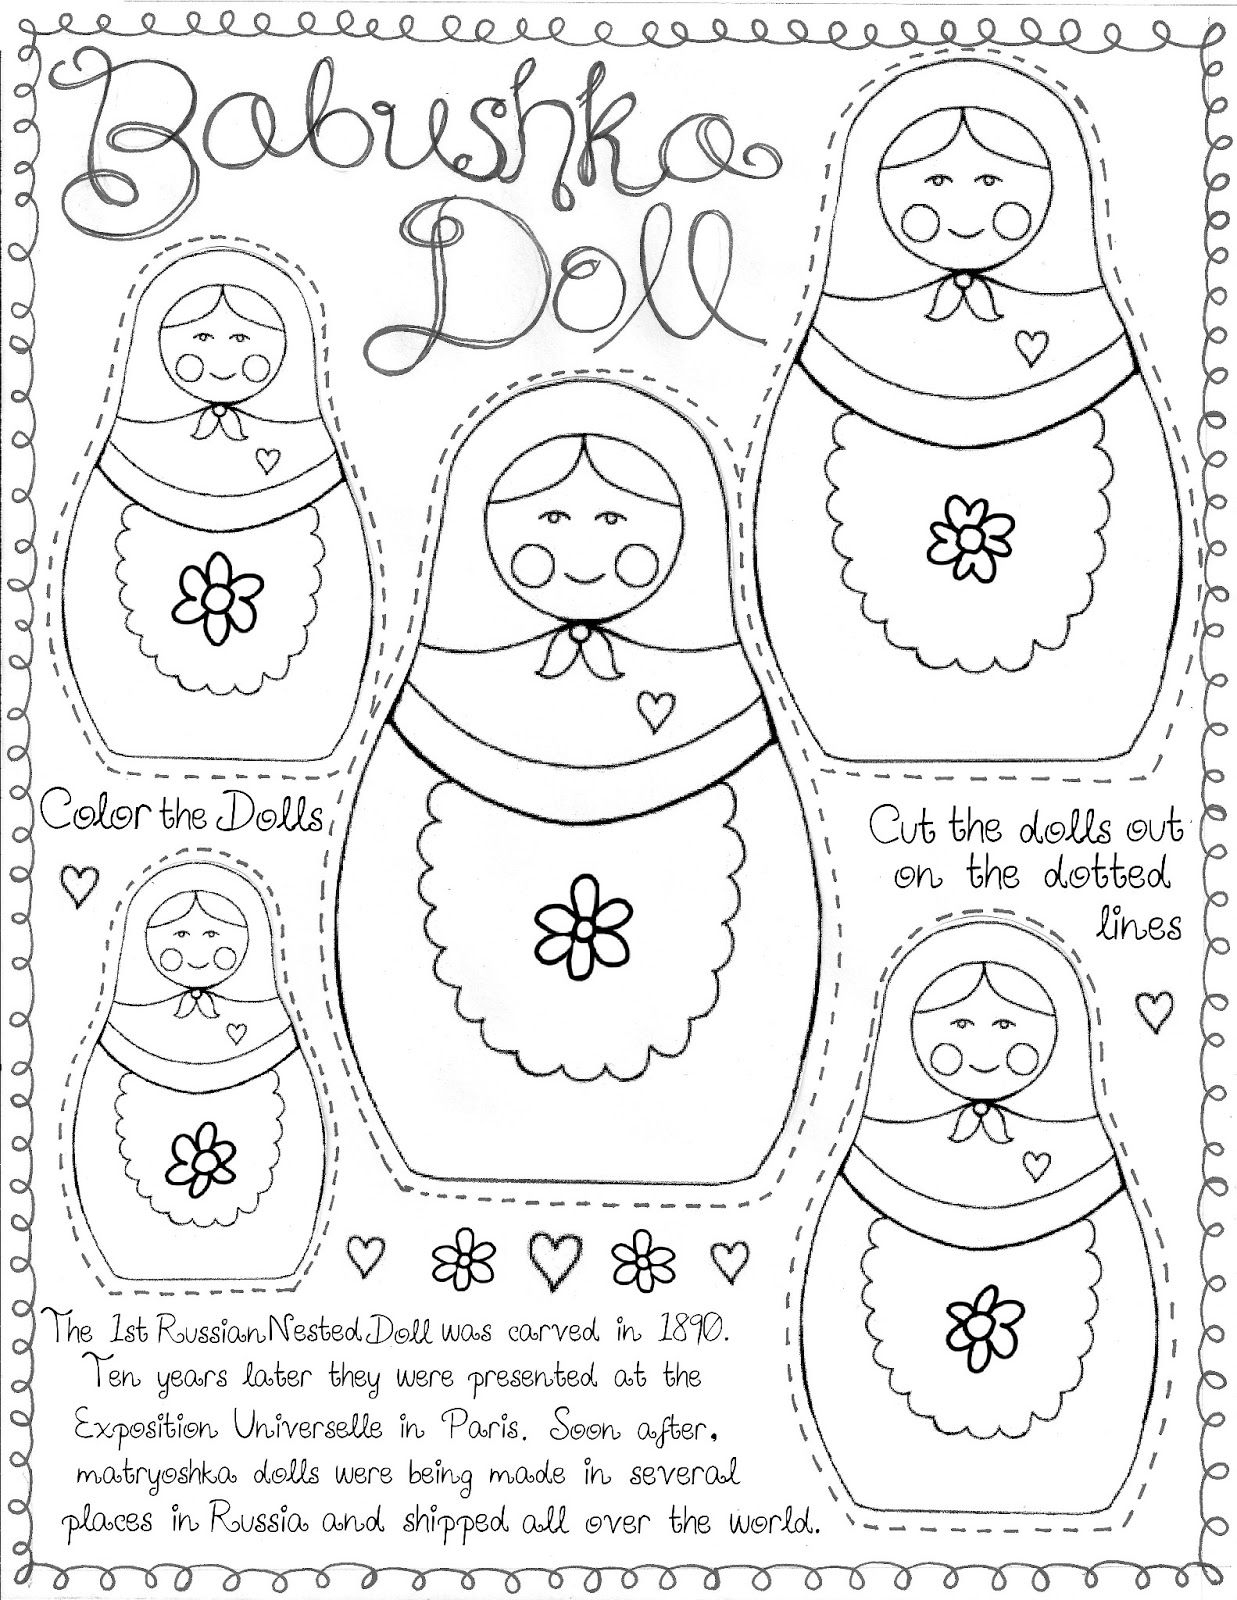 Matryoshka Doll&amp;quot; Printable For &amp;quot;around The World&amp;quot; Culture Study - Free Printable Paper Dolls From Around The World